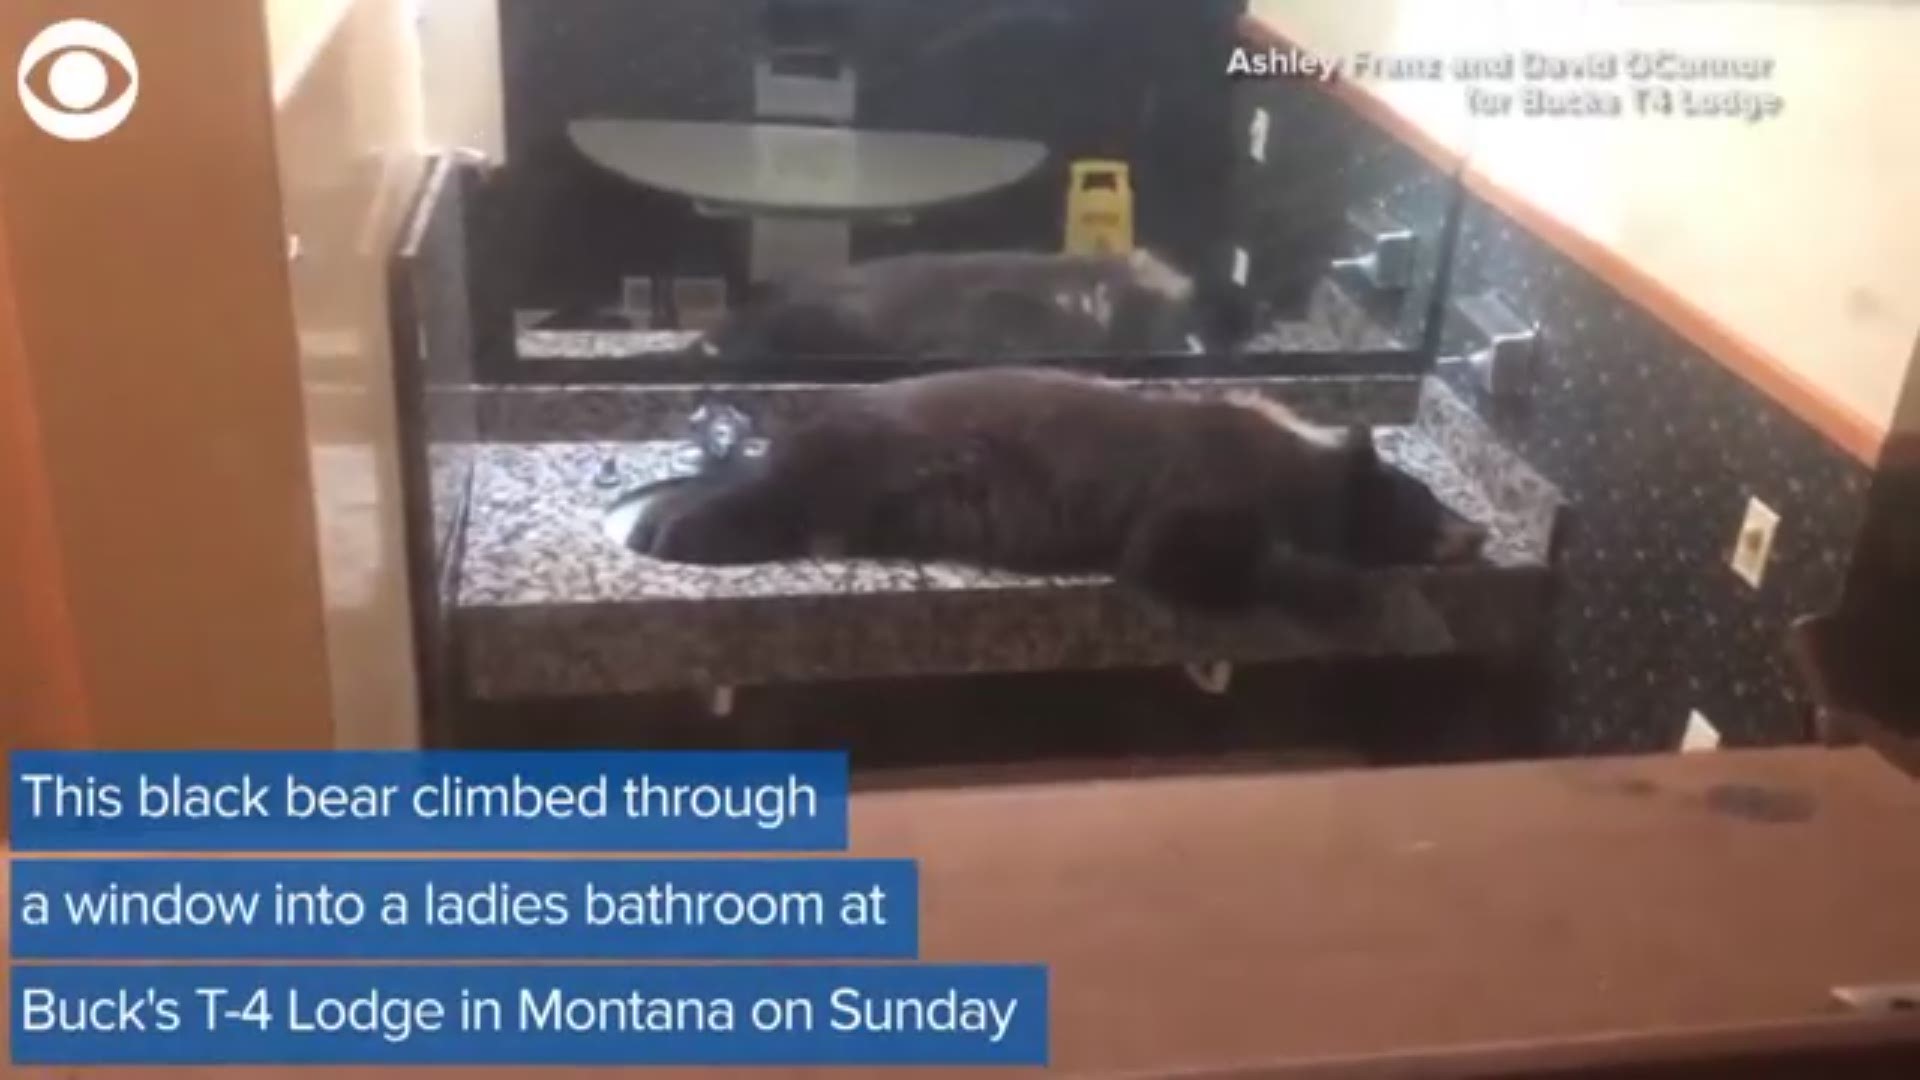 A black bear found a really comfortable place to take a nap - in a hotel lobby bathroom in Montana.